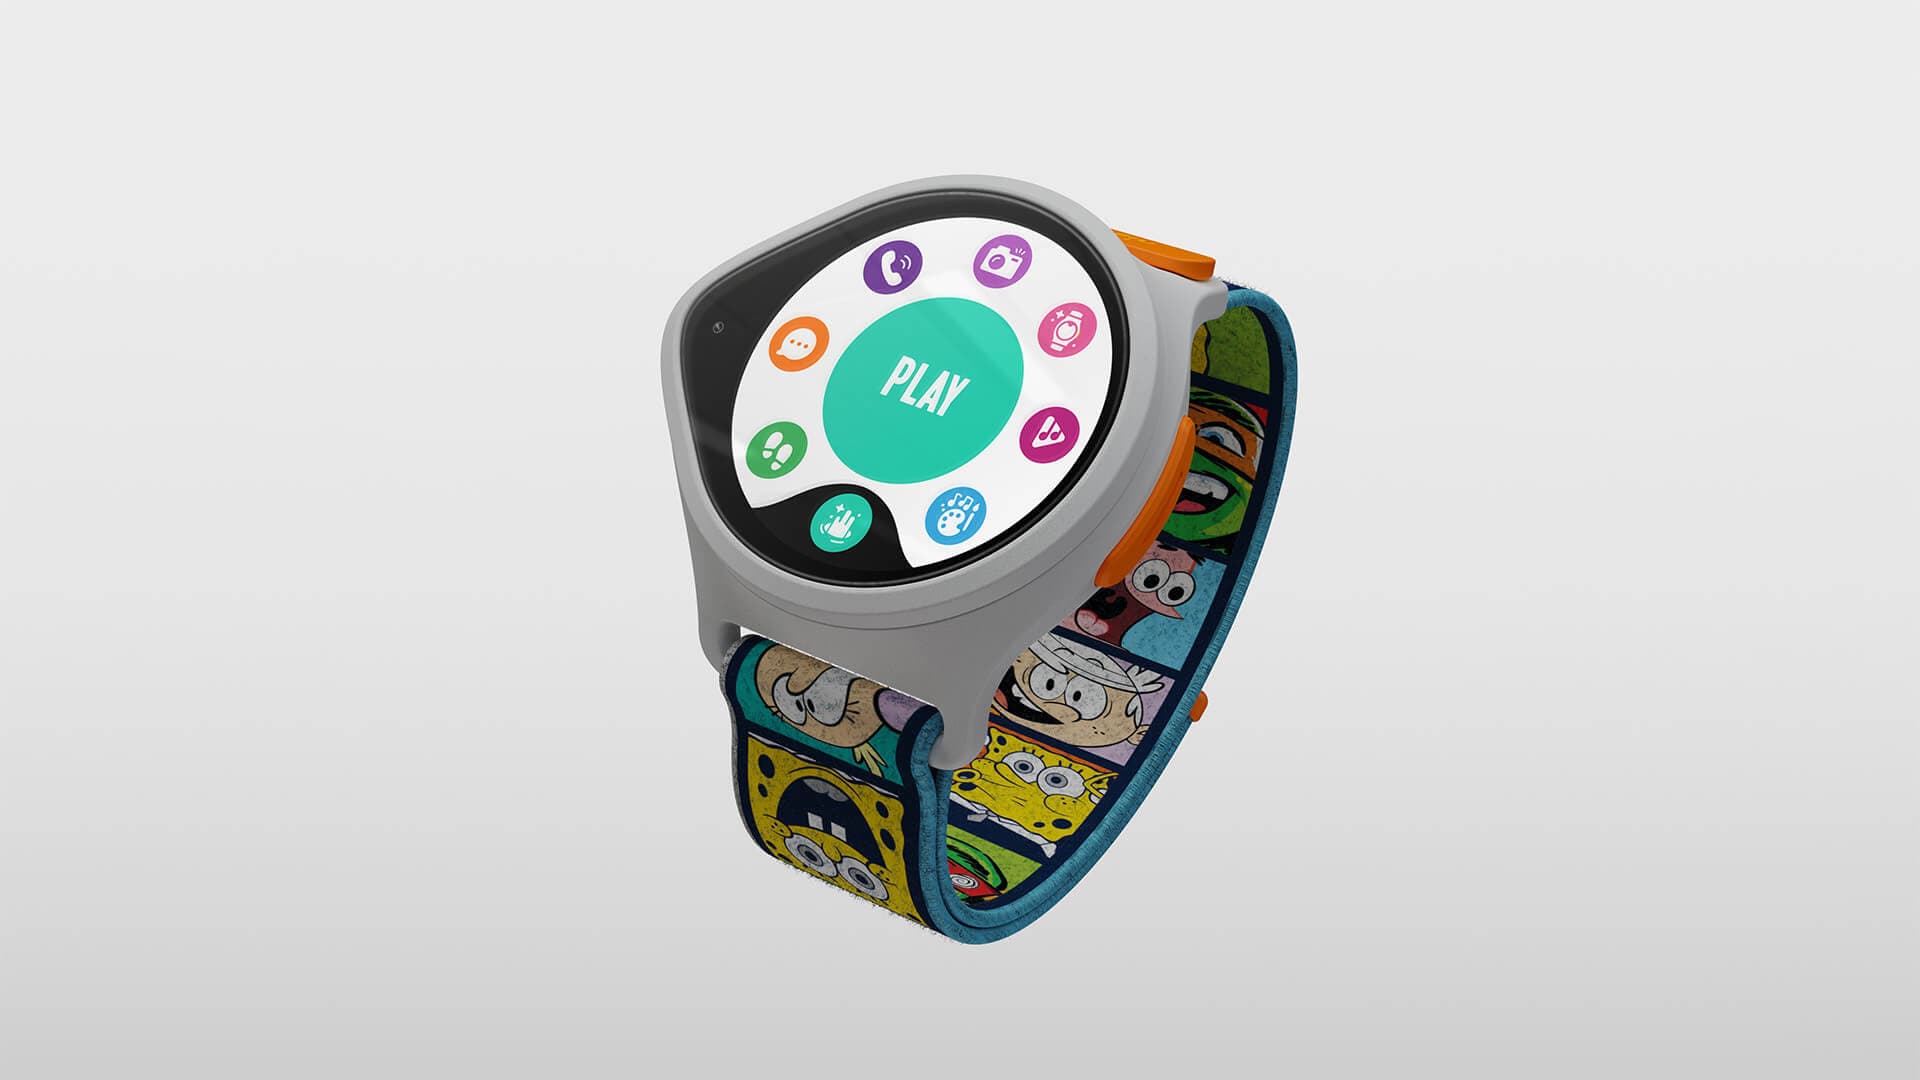 NickWatch Play interface and character band